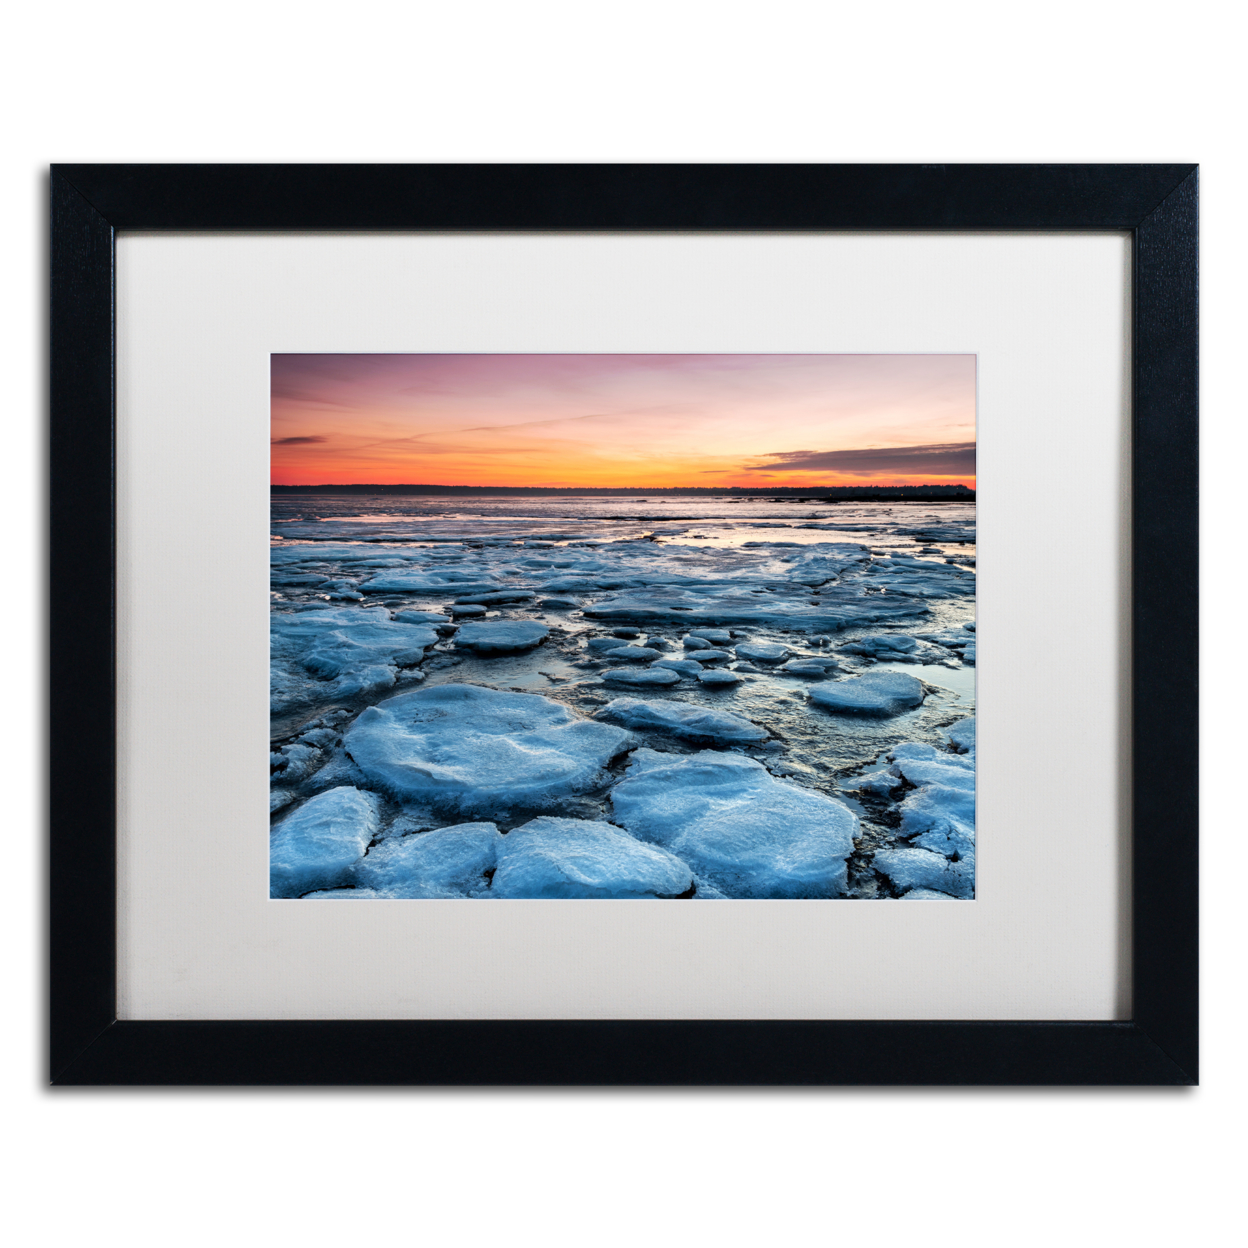 Pierre Leclerc 'Icy Sunrise 2' Black Wooden Framed Art 18 X 22 Inches